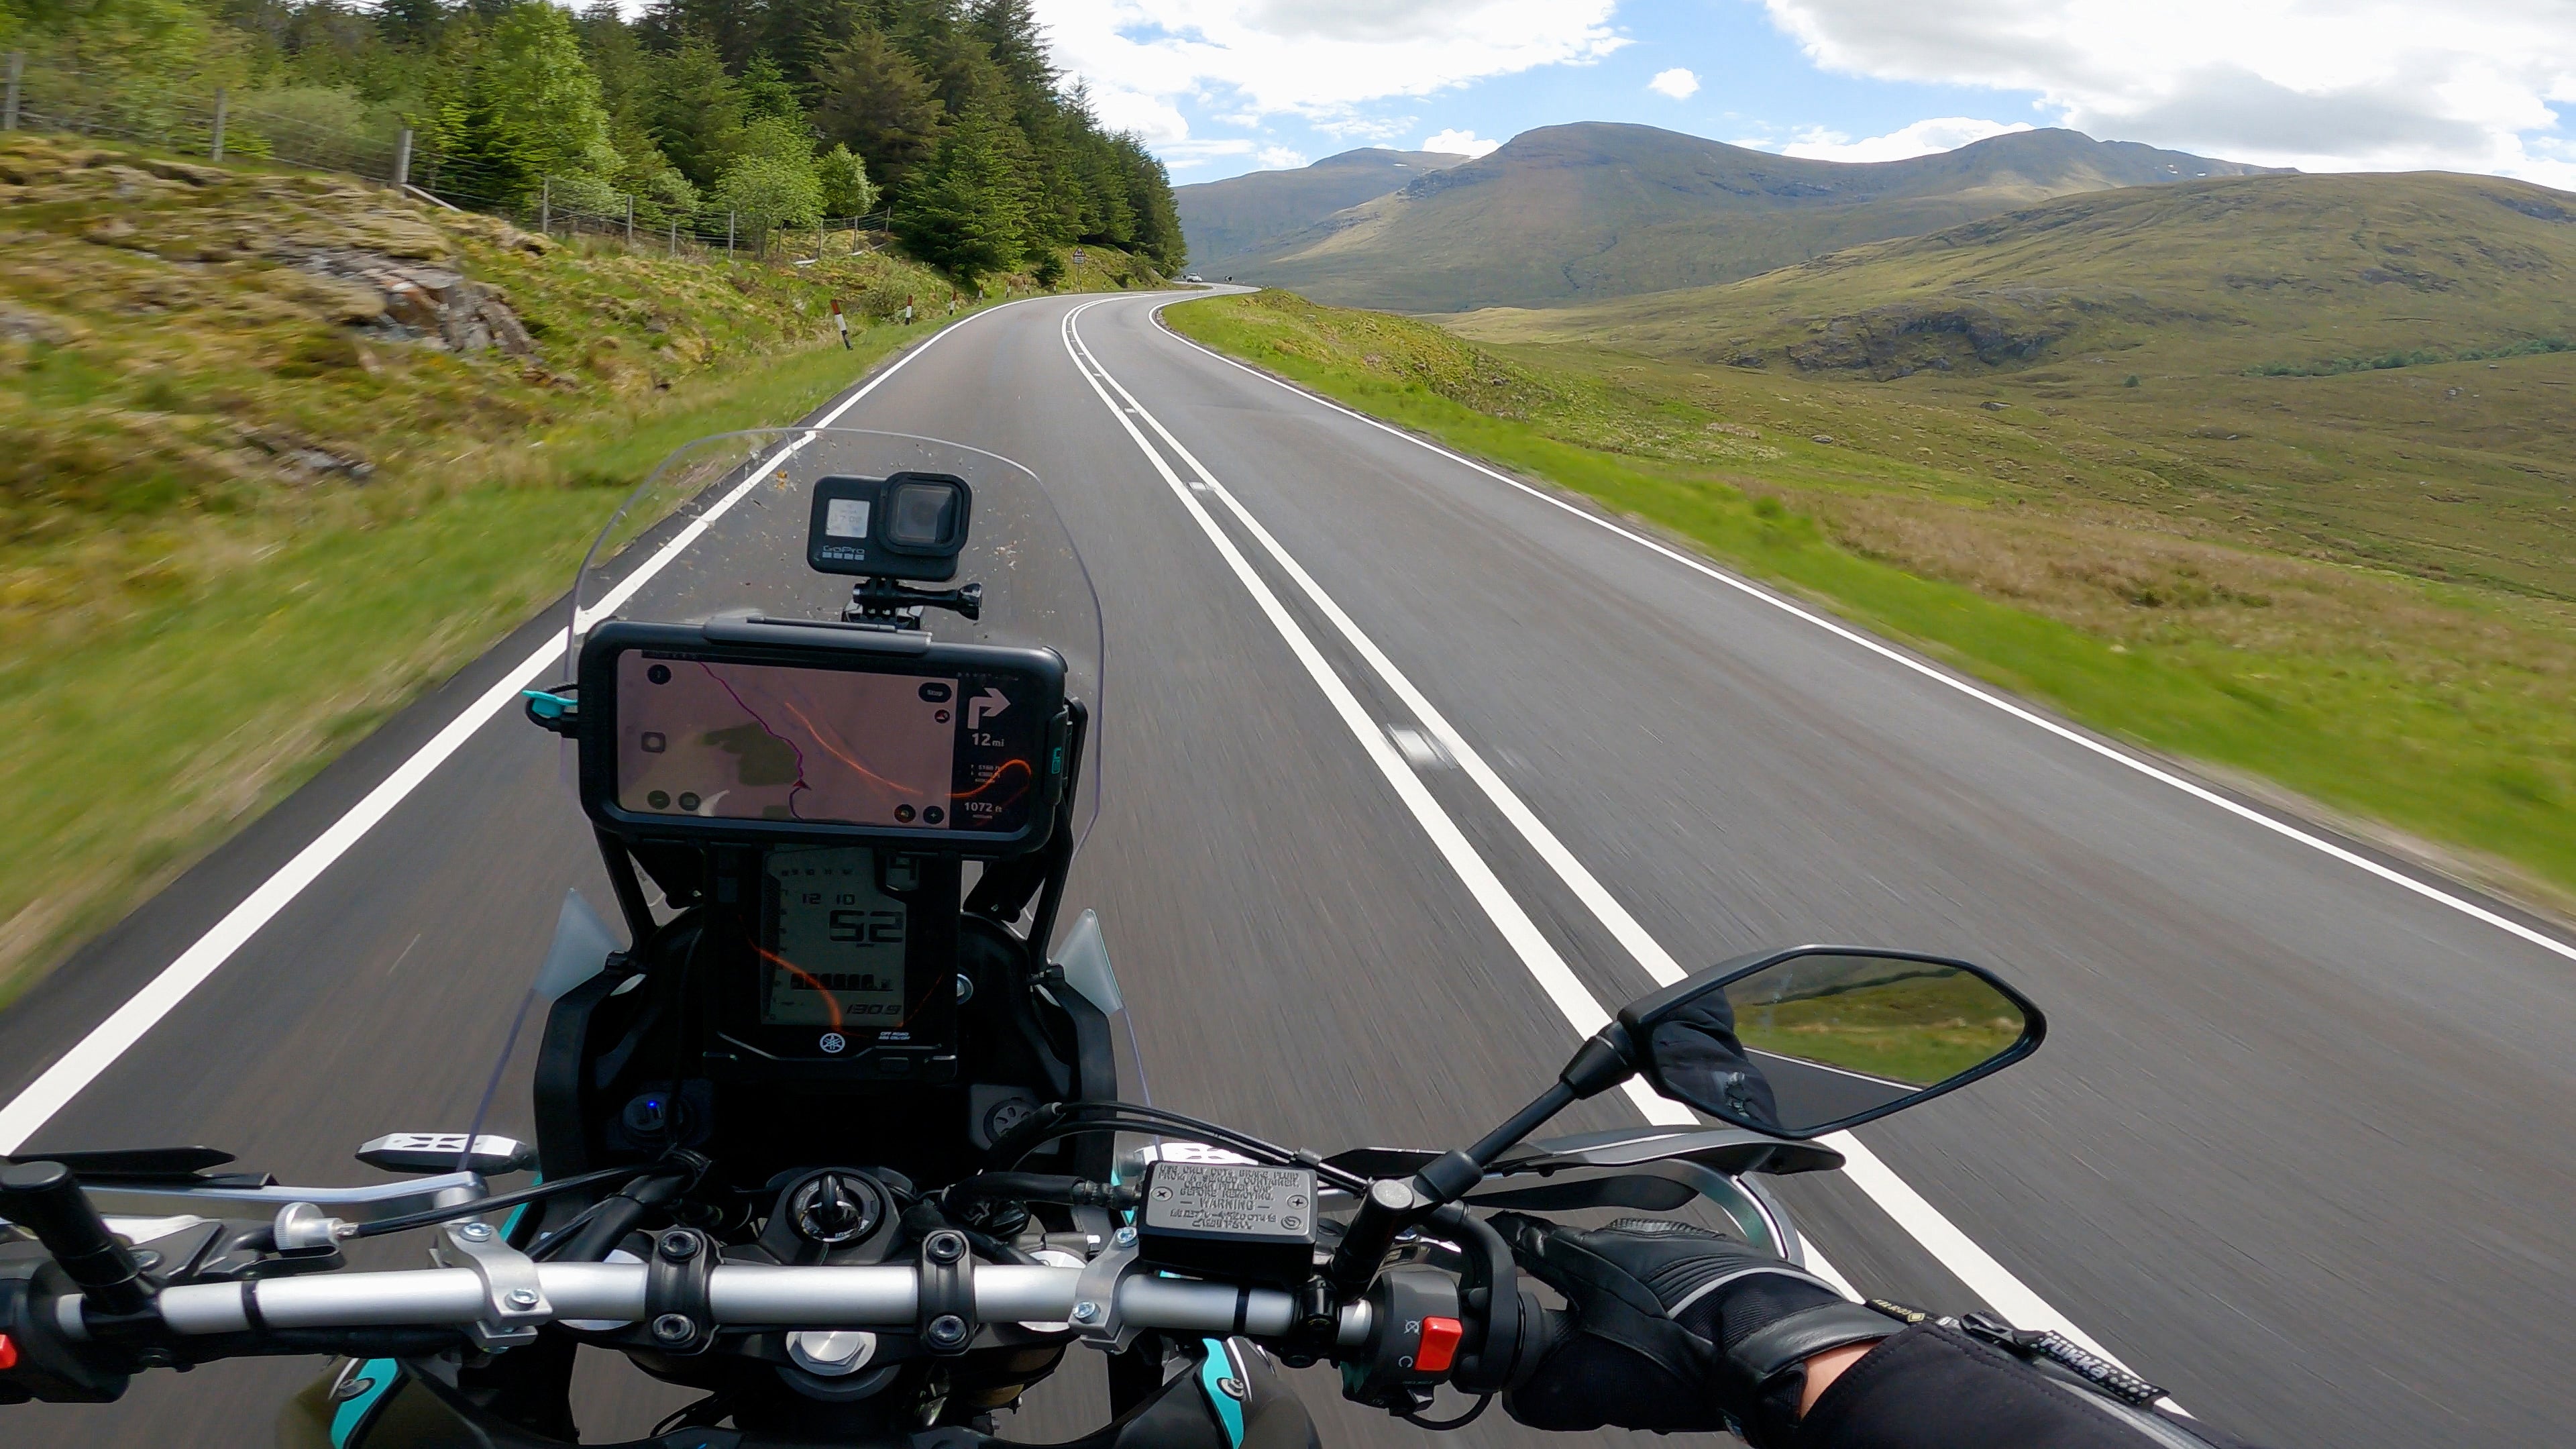 A87 Dornie sweeping bends with motorcycle and smartphone in Ultimateaddons case